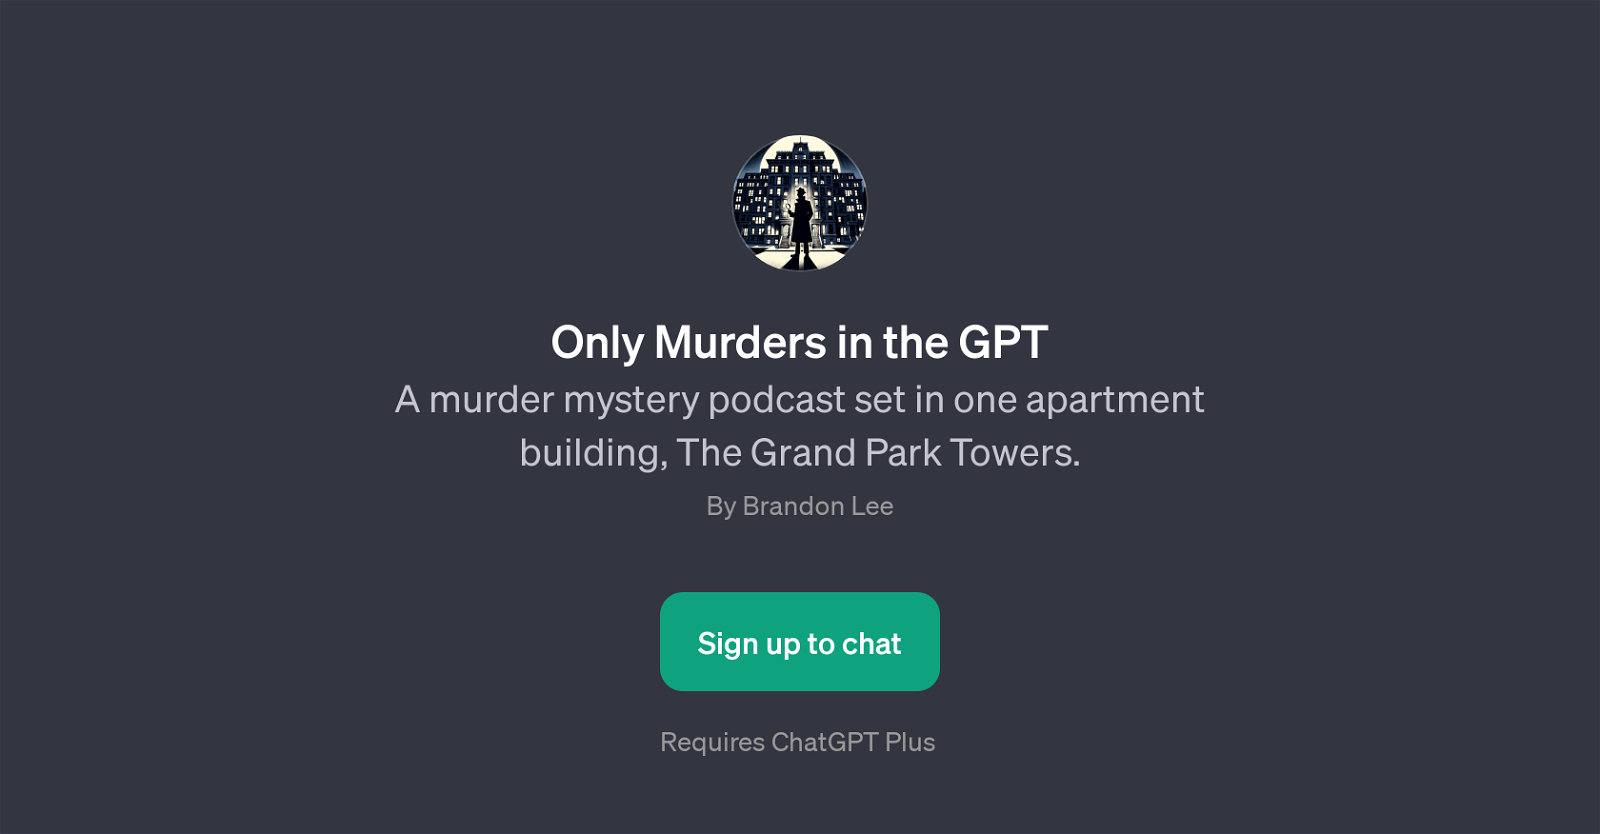 Only Murders in the GPT website